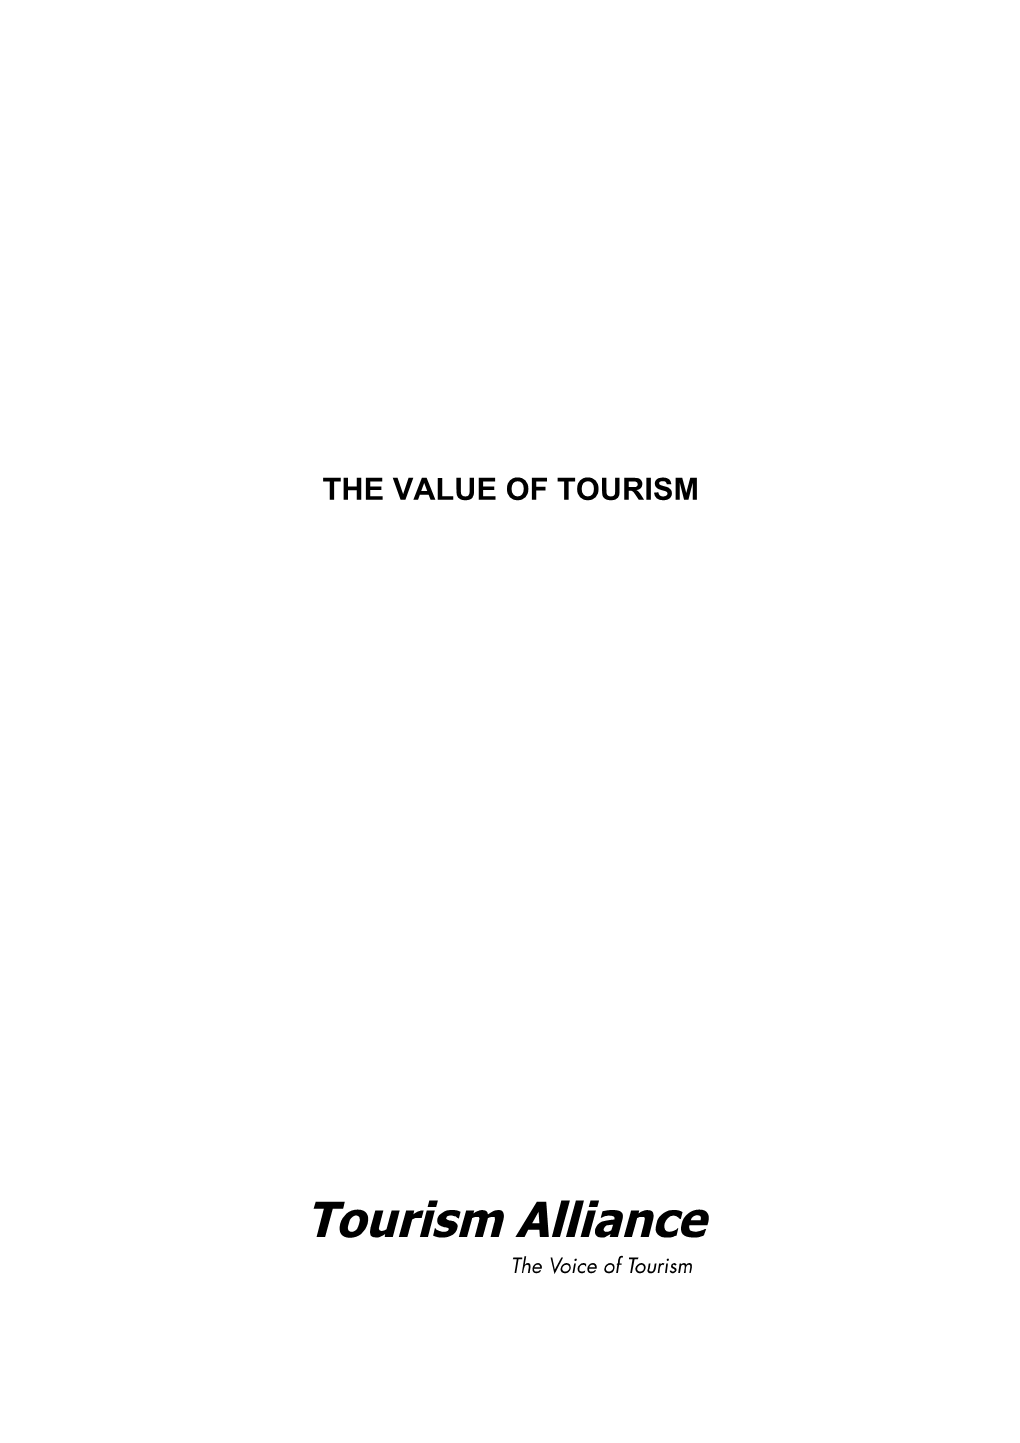 The Value of Tourism to the UK